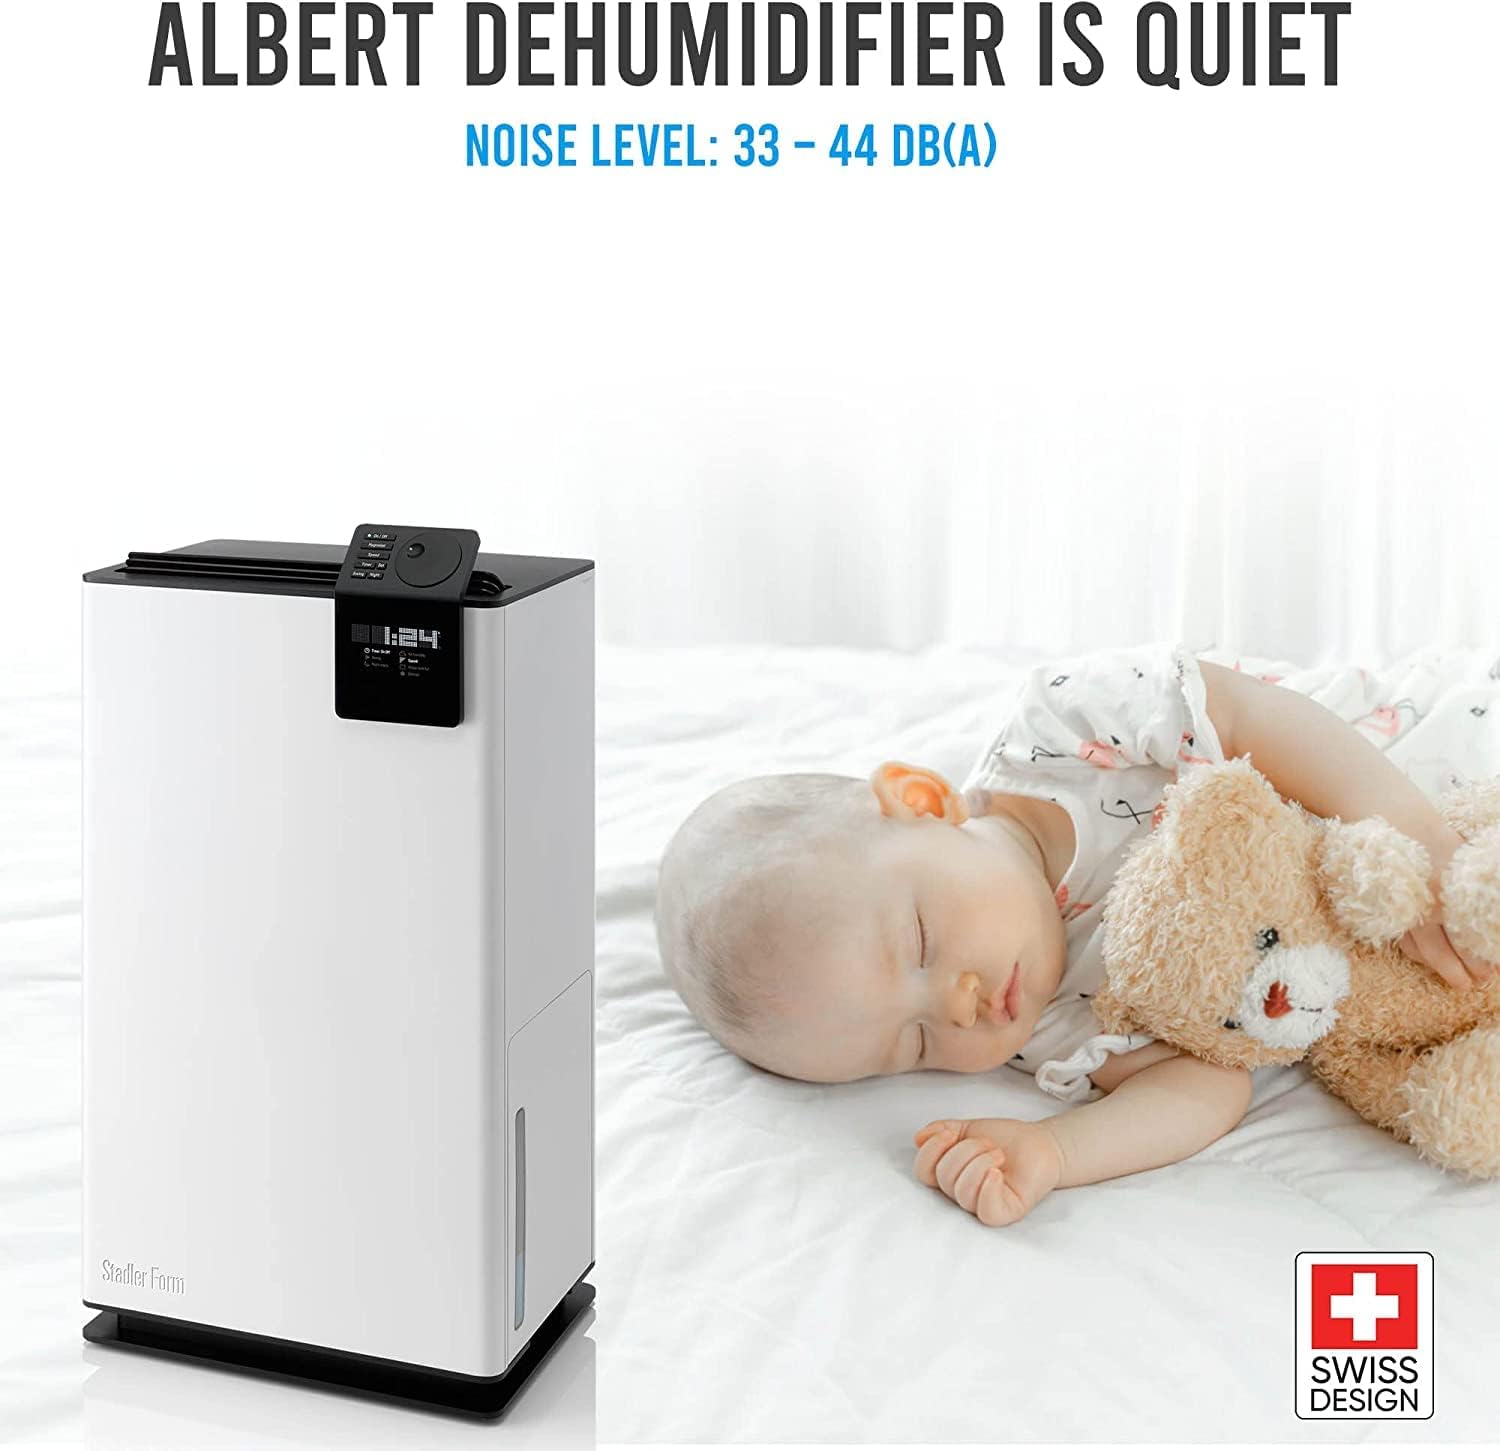 Swiss Design Dehumidifier-Mold Prevention for Home/Office up to 70sqm,Whisper-Quiet,Adaptive Night & Swing Modes,Continuous Drainage Albert ,2 Year Warranty+Local Support-GCC Power Plug